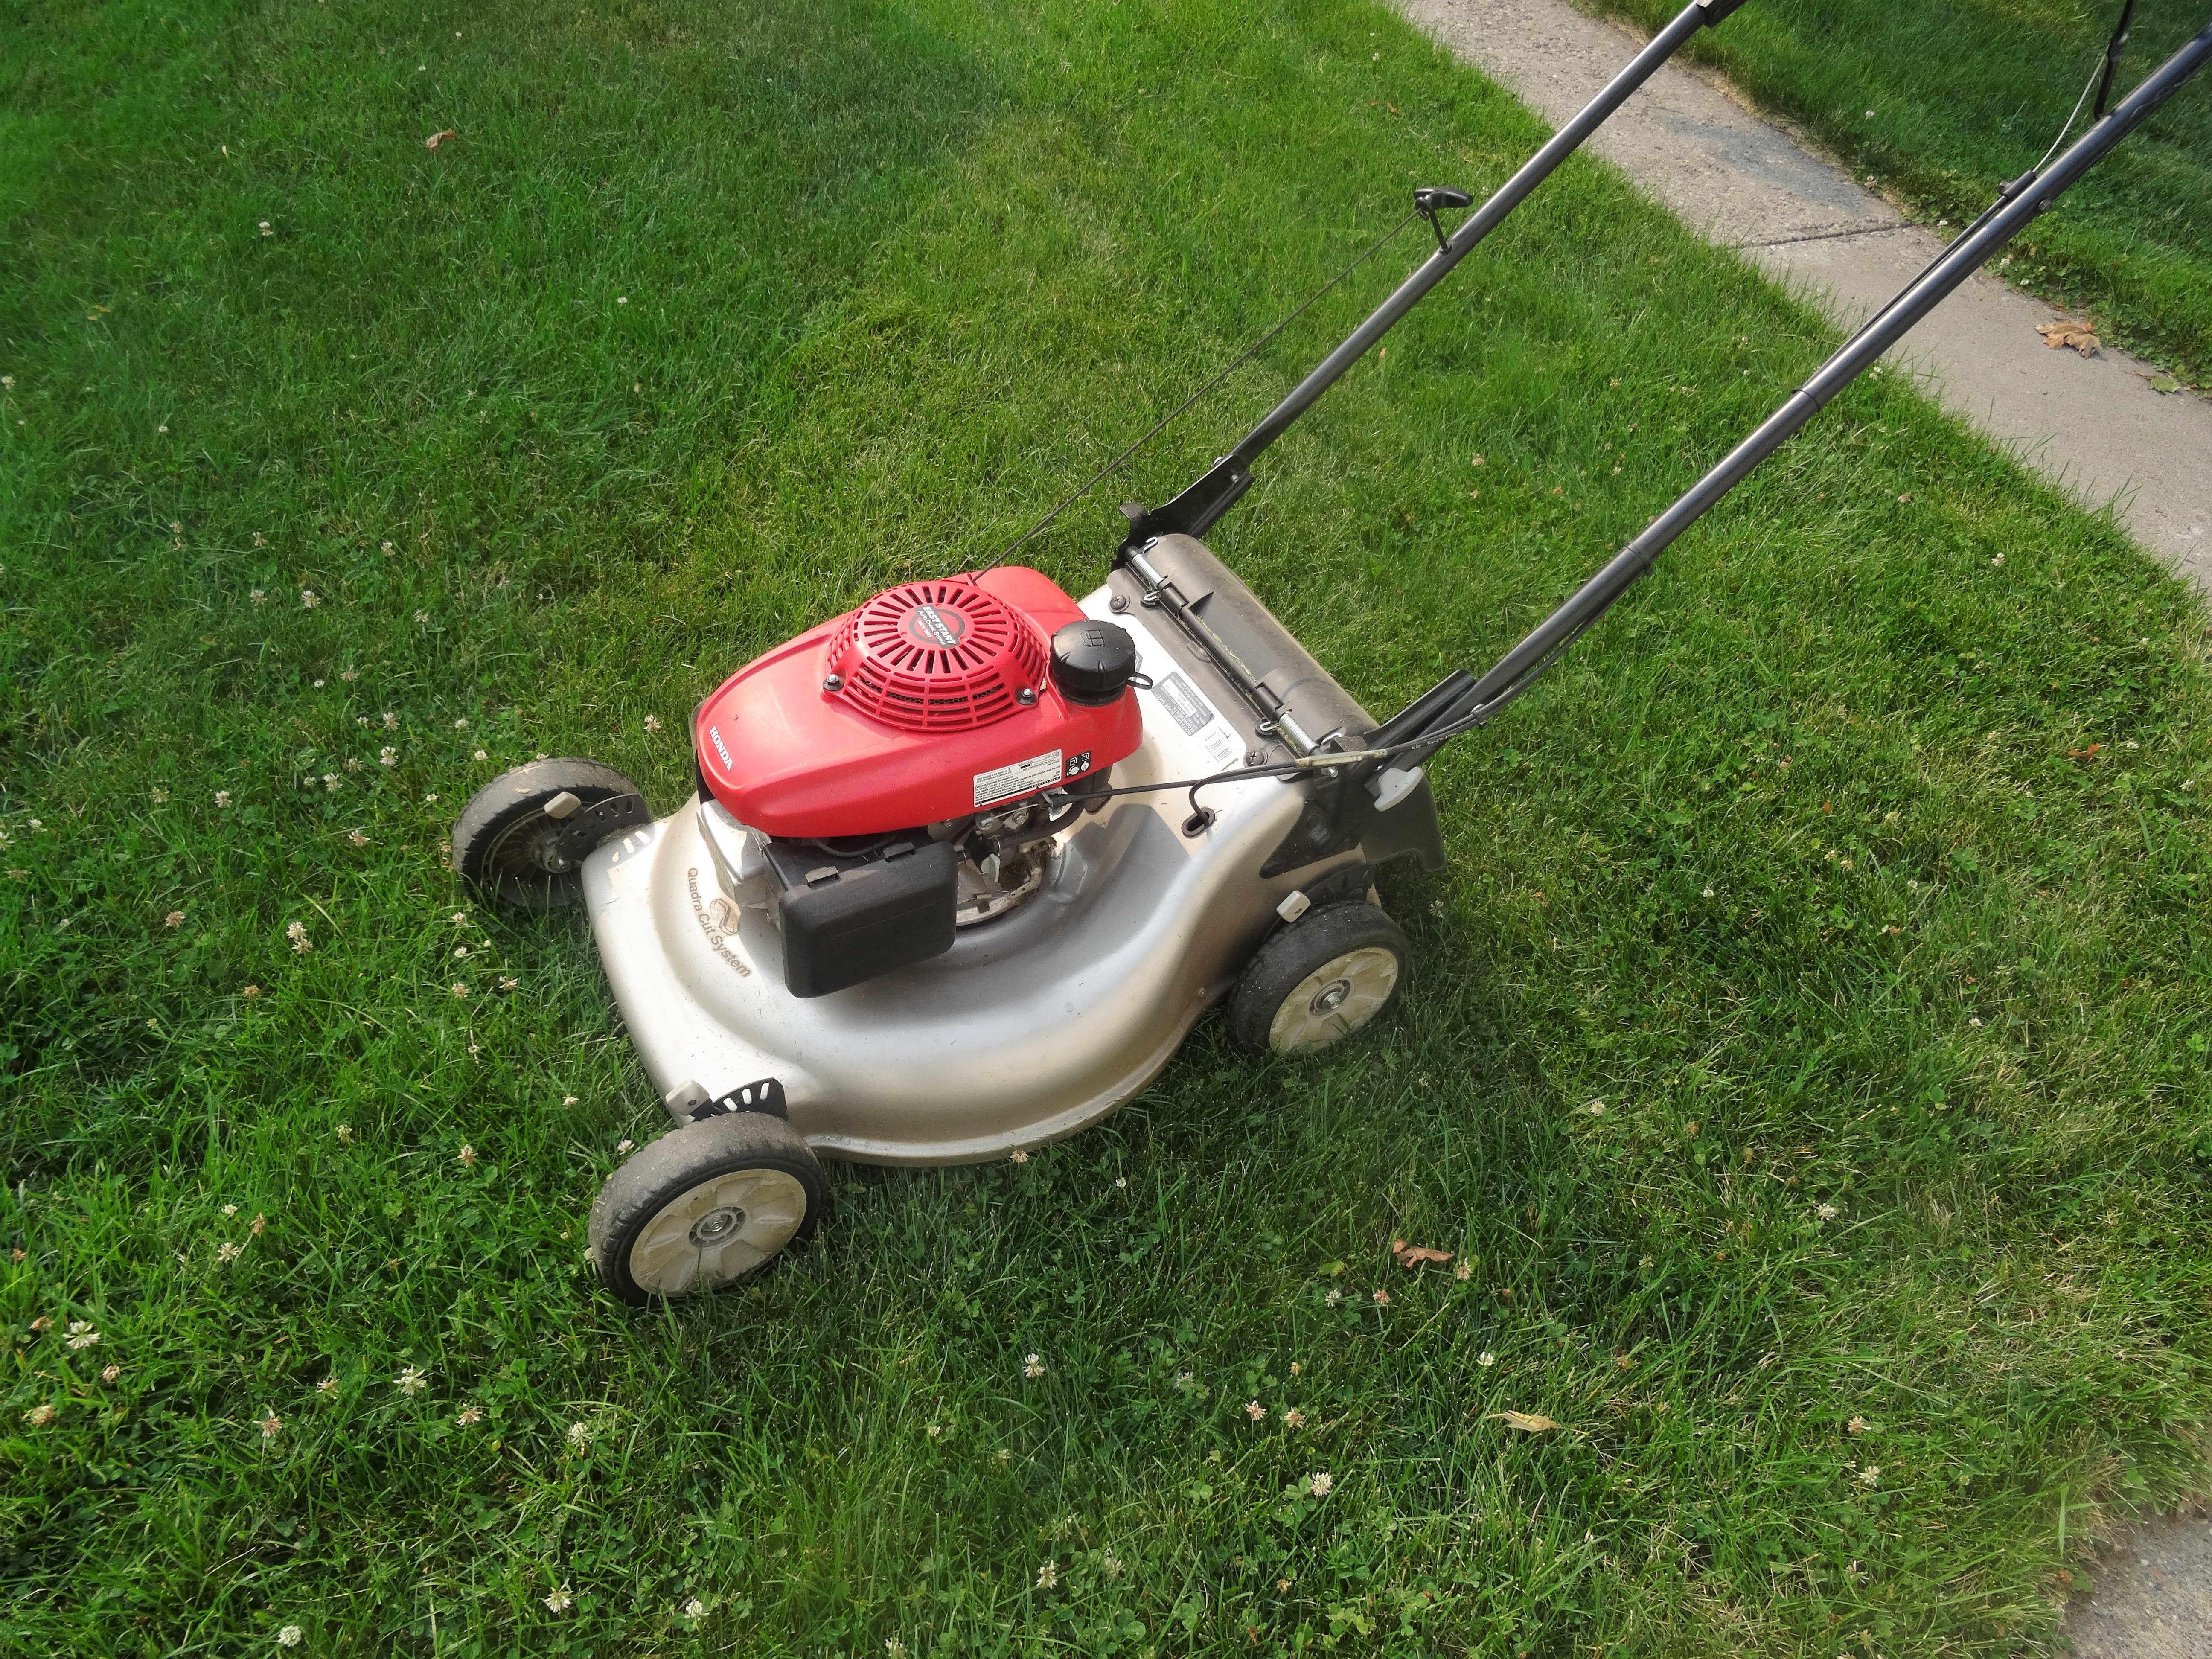 a lawnmower on a residential lawn